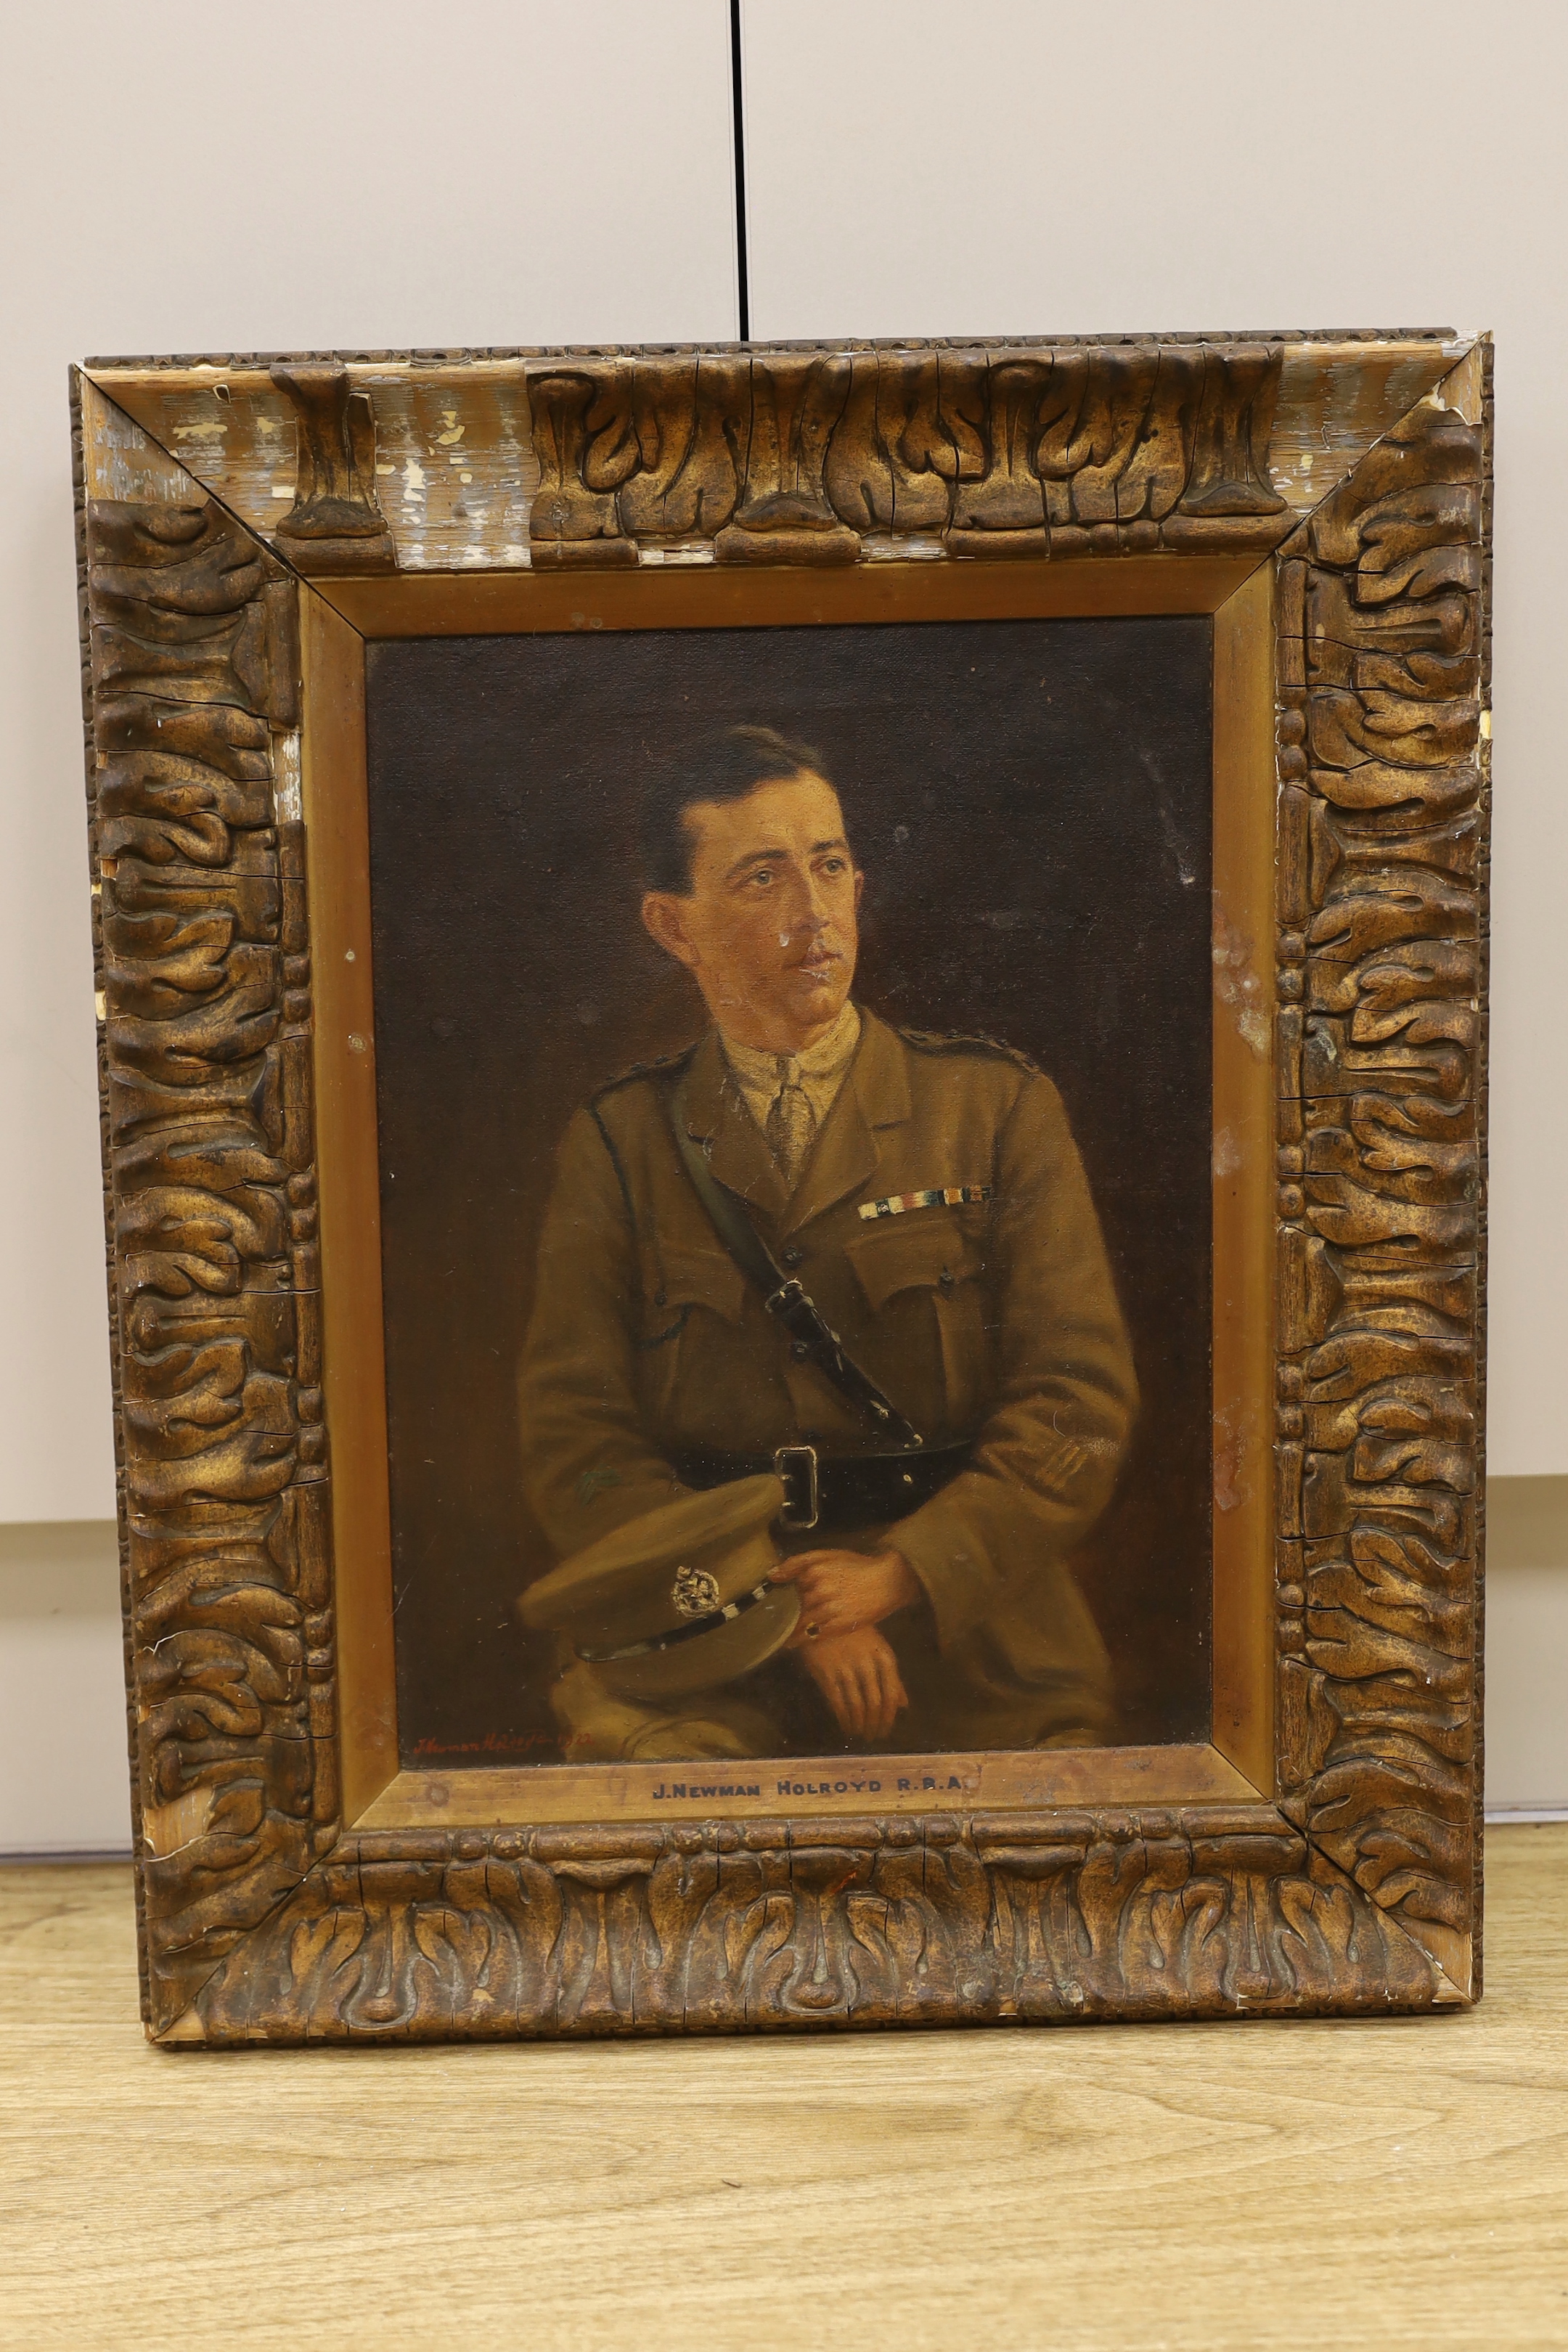 John Newman Holroyd RBA (1881-1954), oil on canvas, Portrait of an army officer, signed and dated 1922, 37 x 27cm